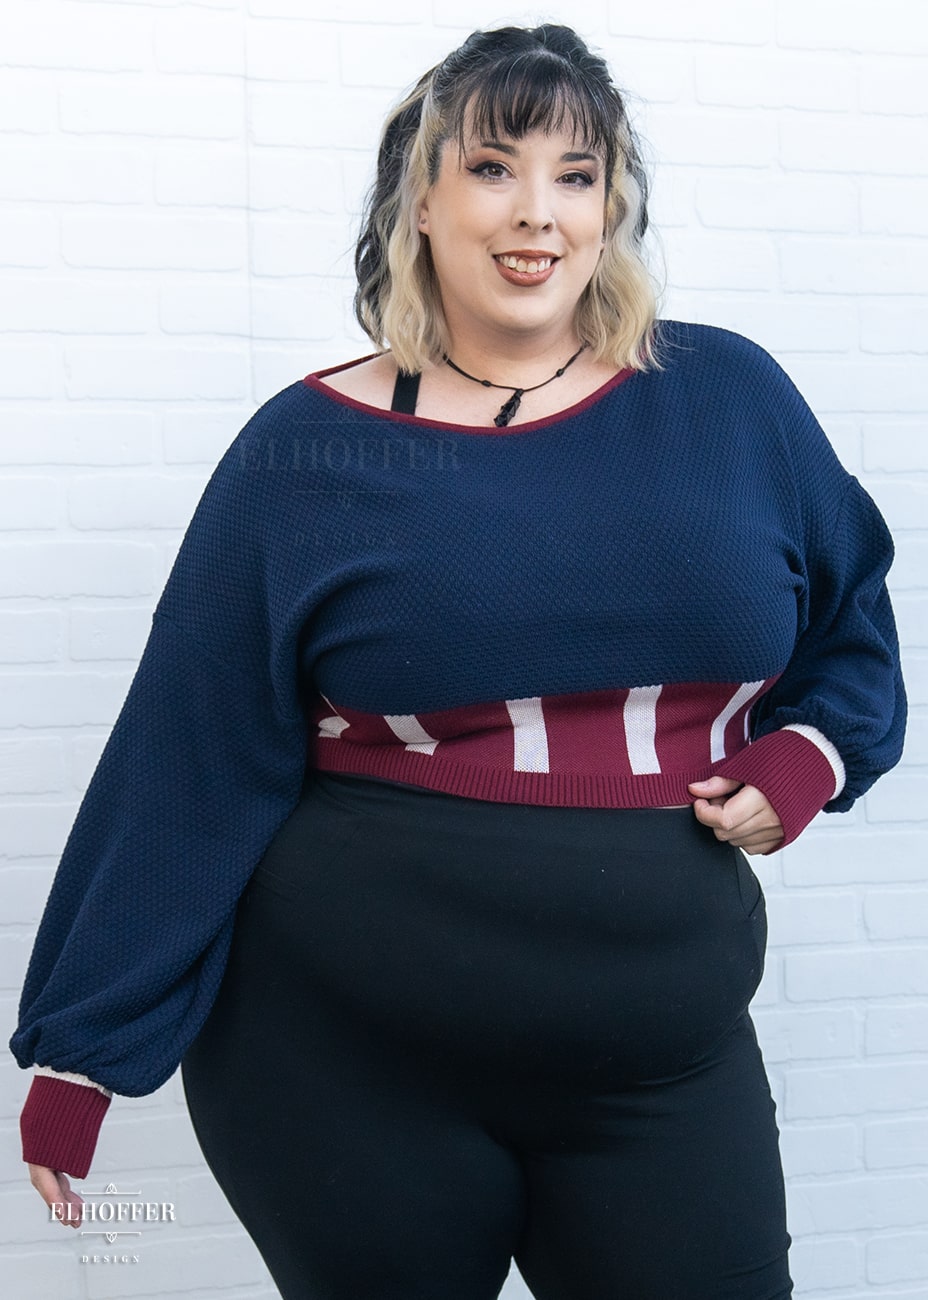 Katie Lynn, a size 2XL fair skinned model with black and blonde hair, is wearing the red, white and blue knit oversized crop top with bishop sleeves. The sleeves and top of the crop are blue with a waffle knit, the waist is vertical red and white stripes. The cuffs are mainly red with a white detail. There is also a red detail at the neckline.